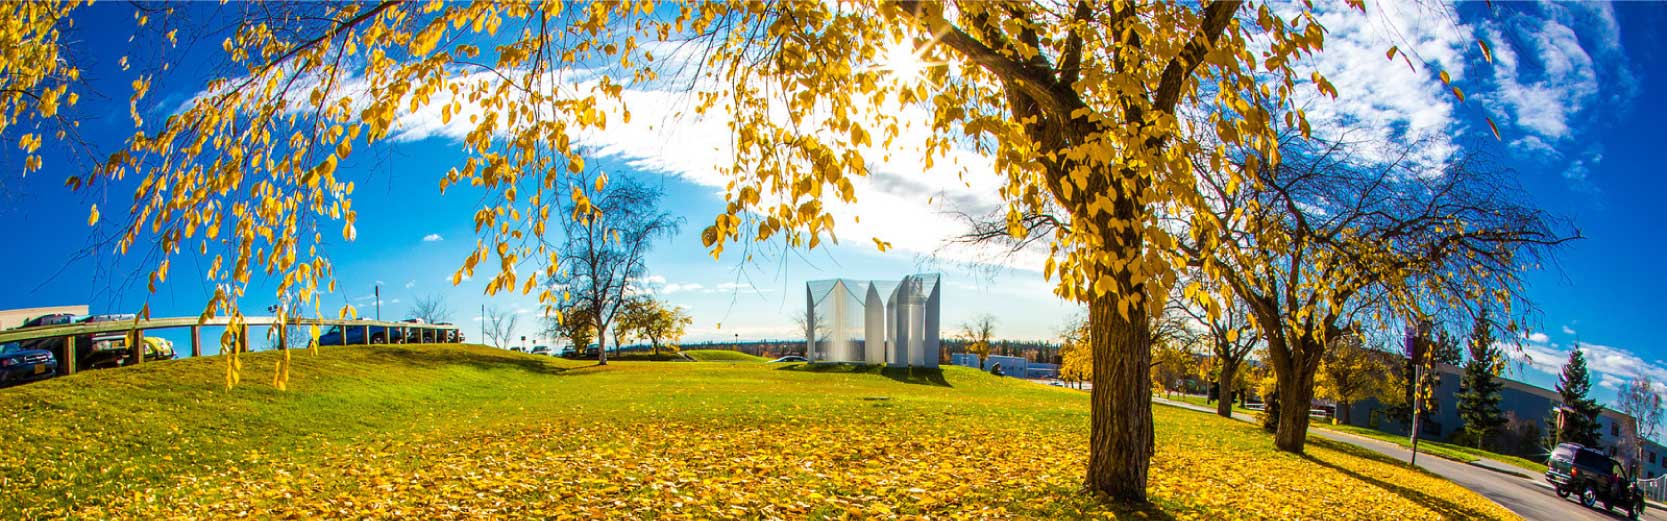 Panoramic photo of autumn trees and the Elysian sculpture on the Fairbanks campus